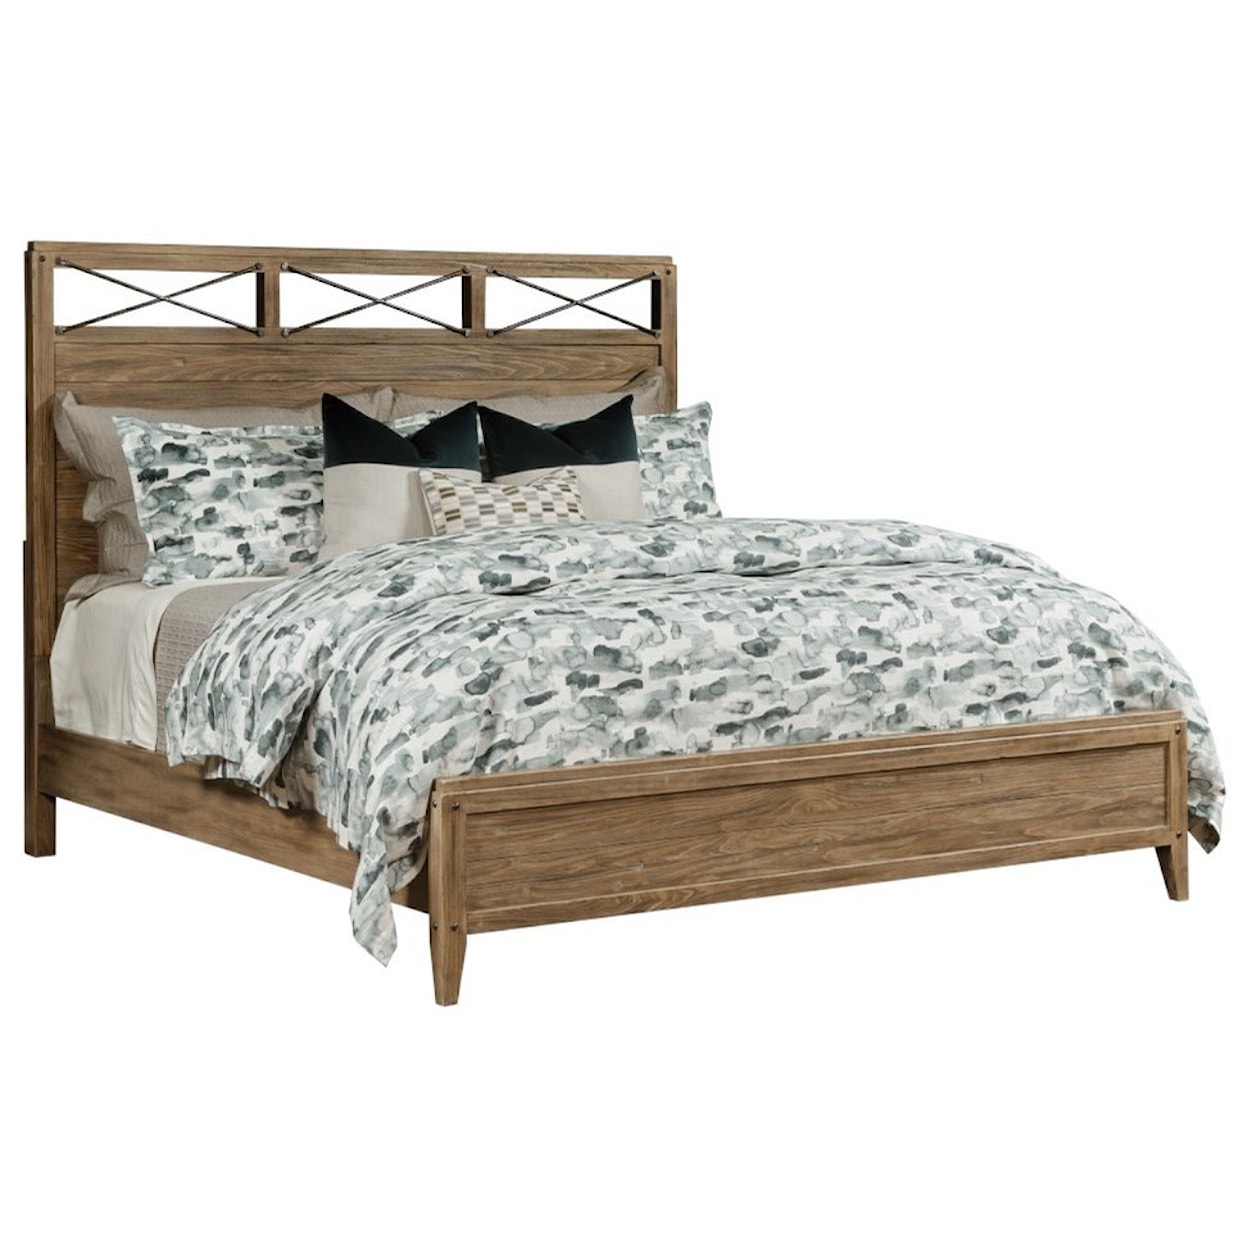 Kincaid Furniture Modern Forge Jackson Queen Bed